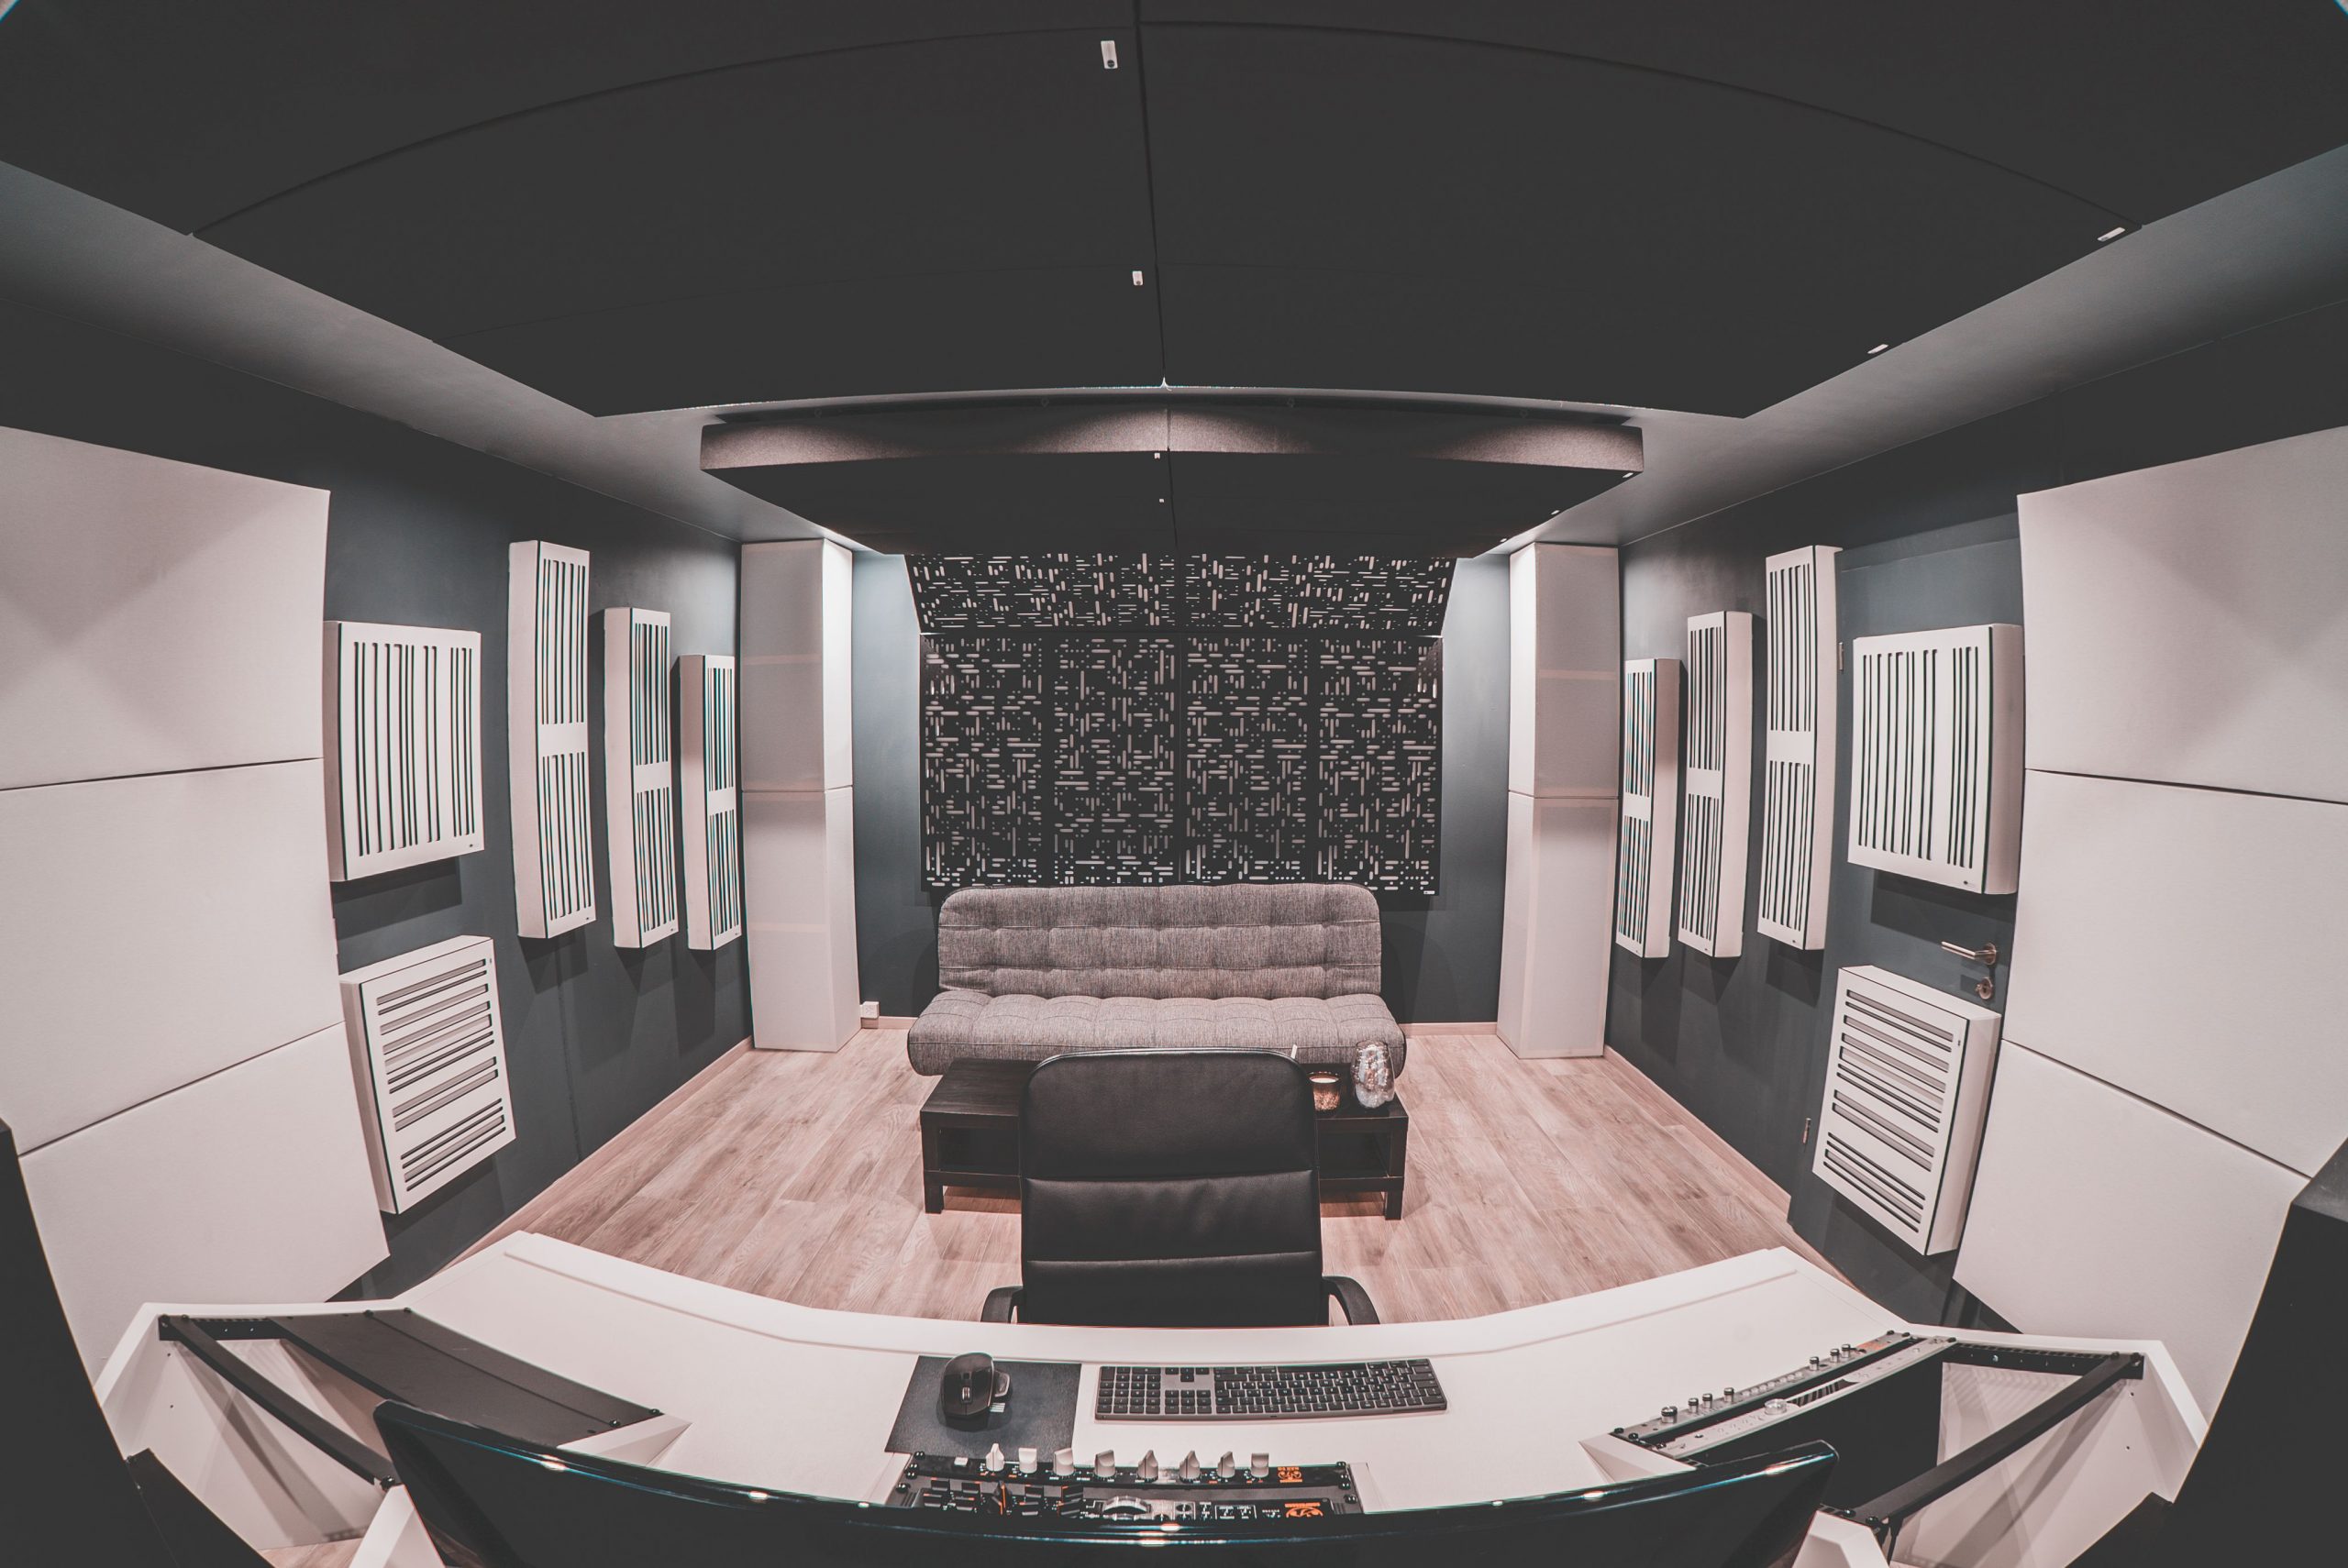 Amazing Studio Design by Loic Allievi using Alpha Series Acoustic Panels and Bass traps